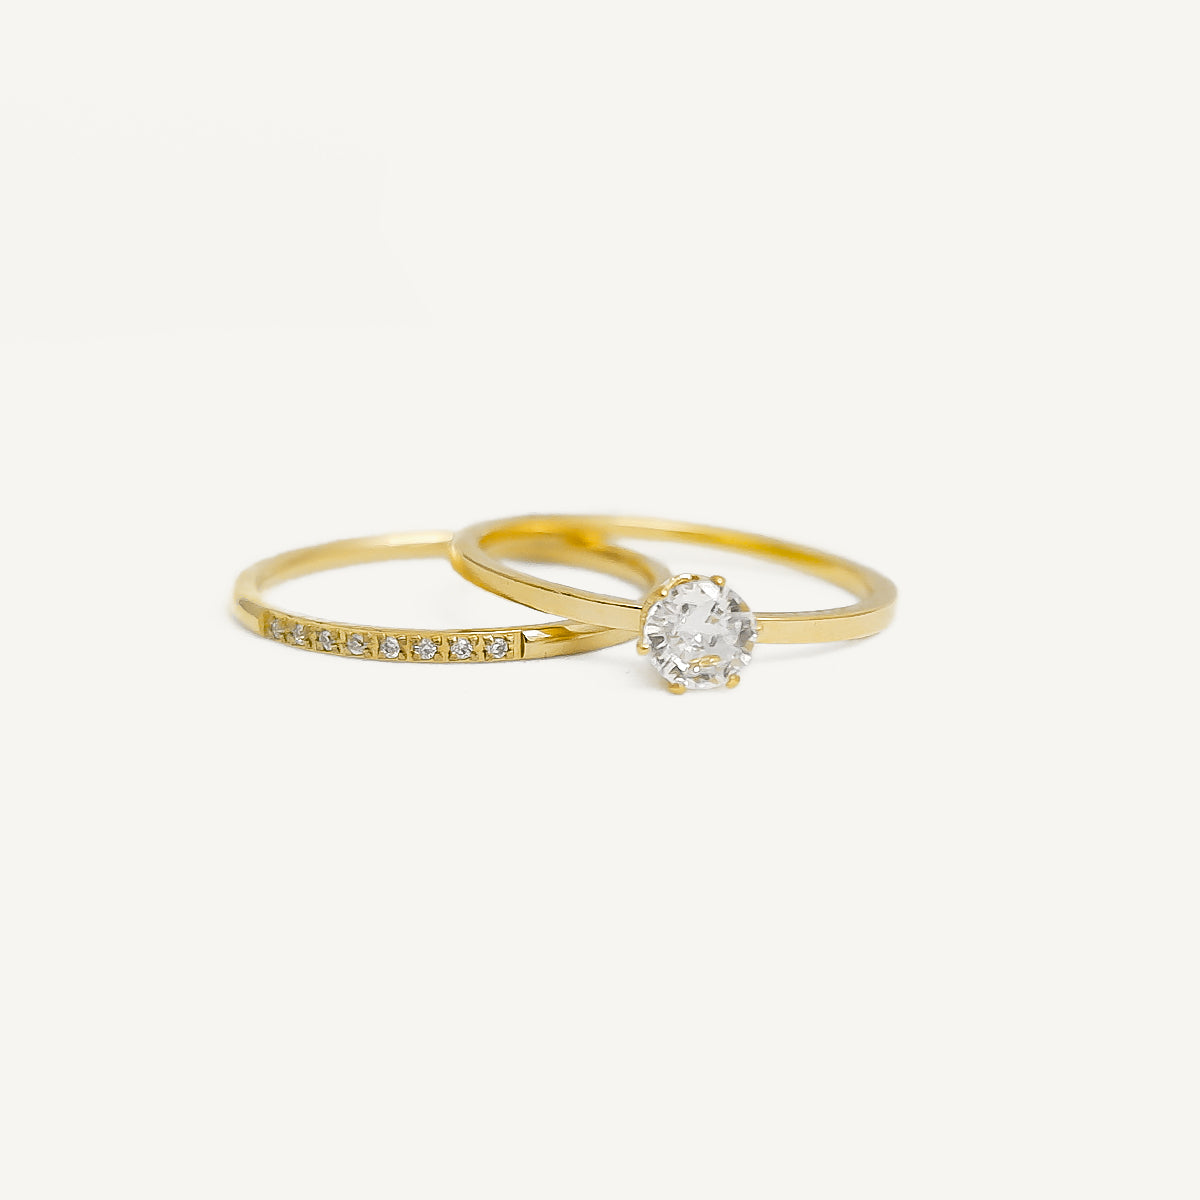 The Half Eternity and Six-Prong Solitaire Ring Bundle